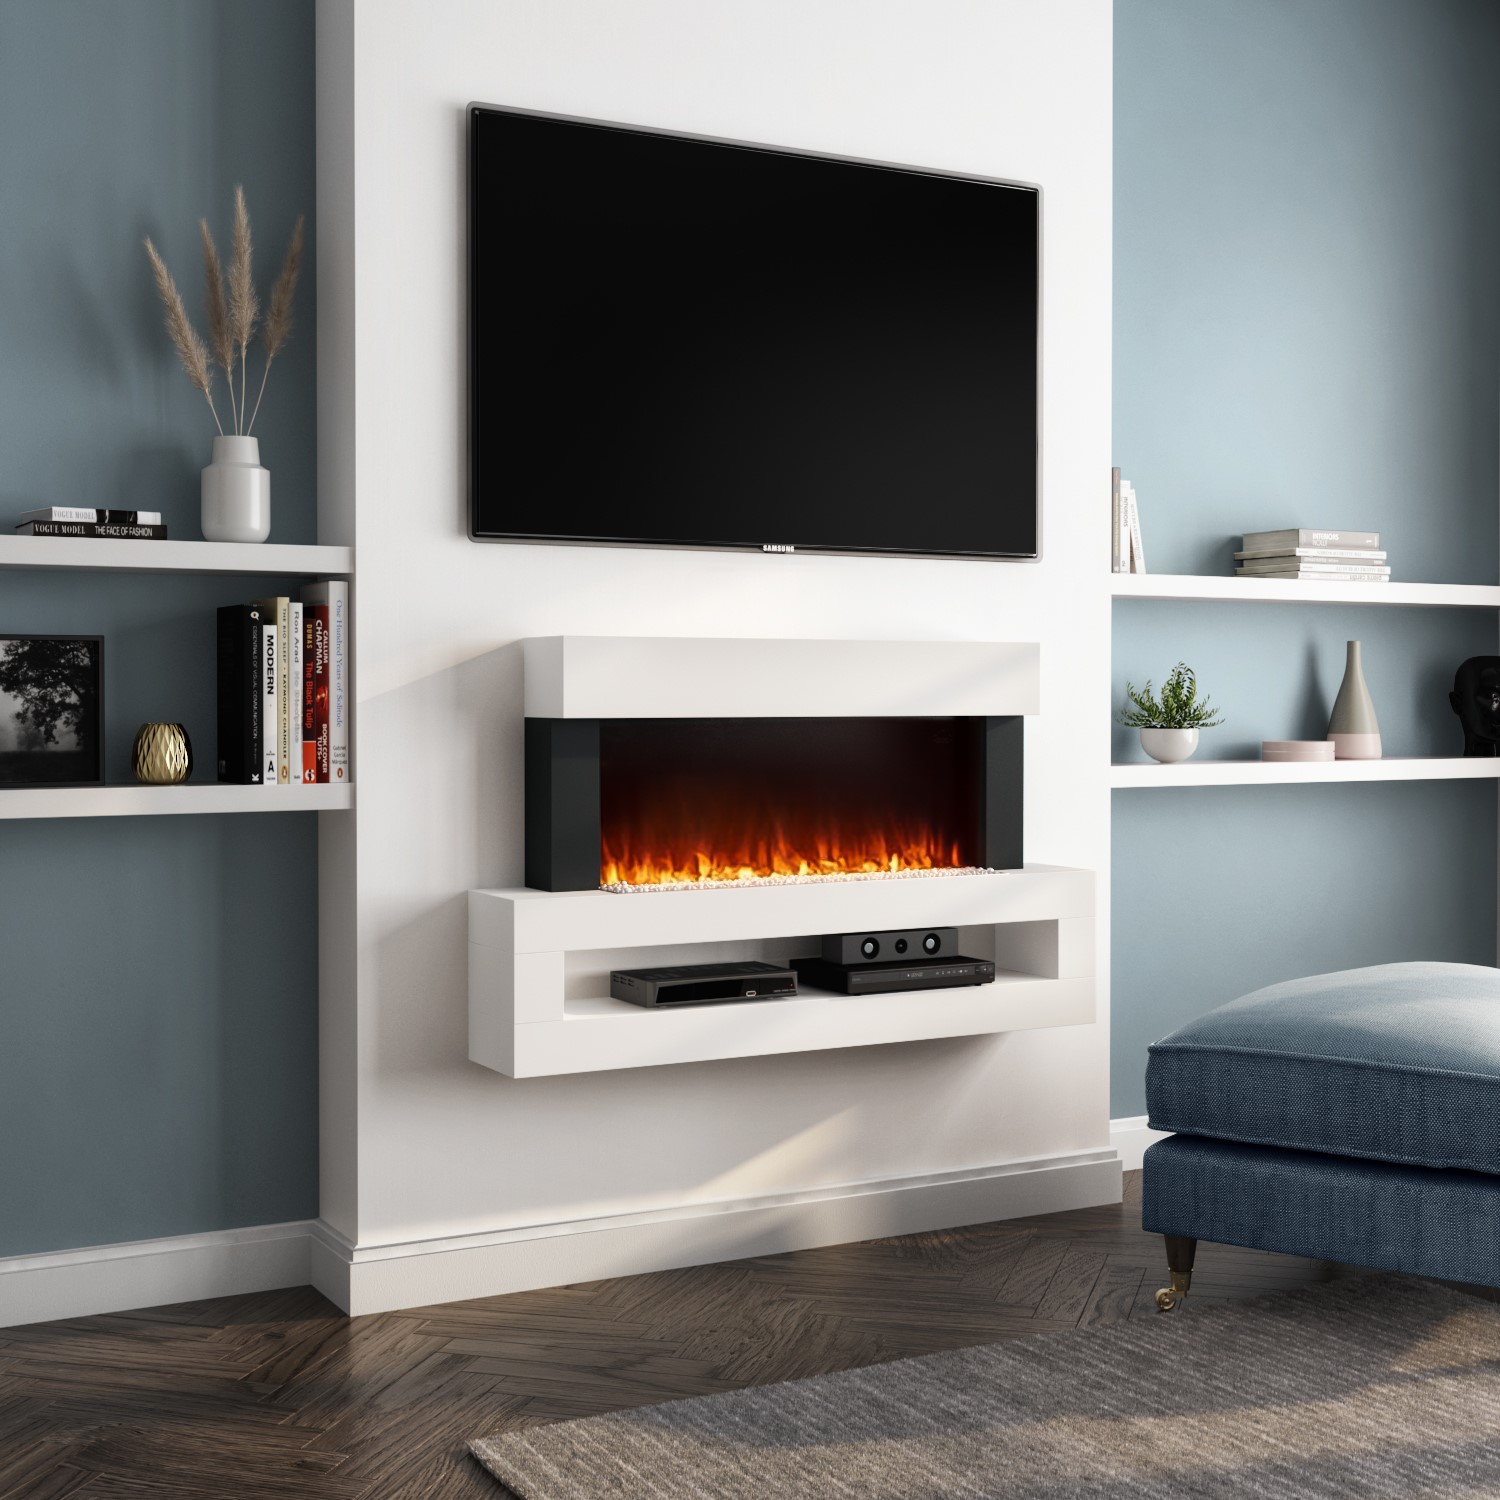 White Wall Mounted Electric Fireplace, Electric Fireplace Under 200 00